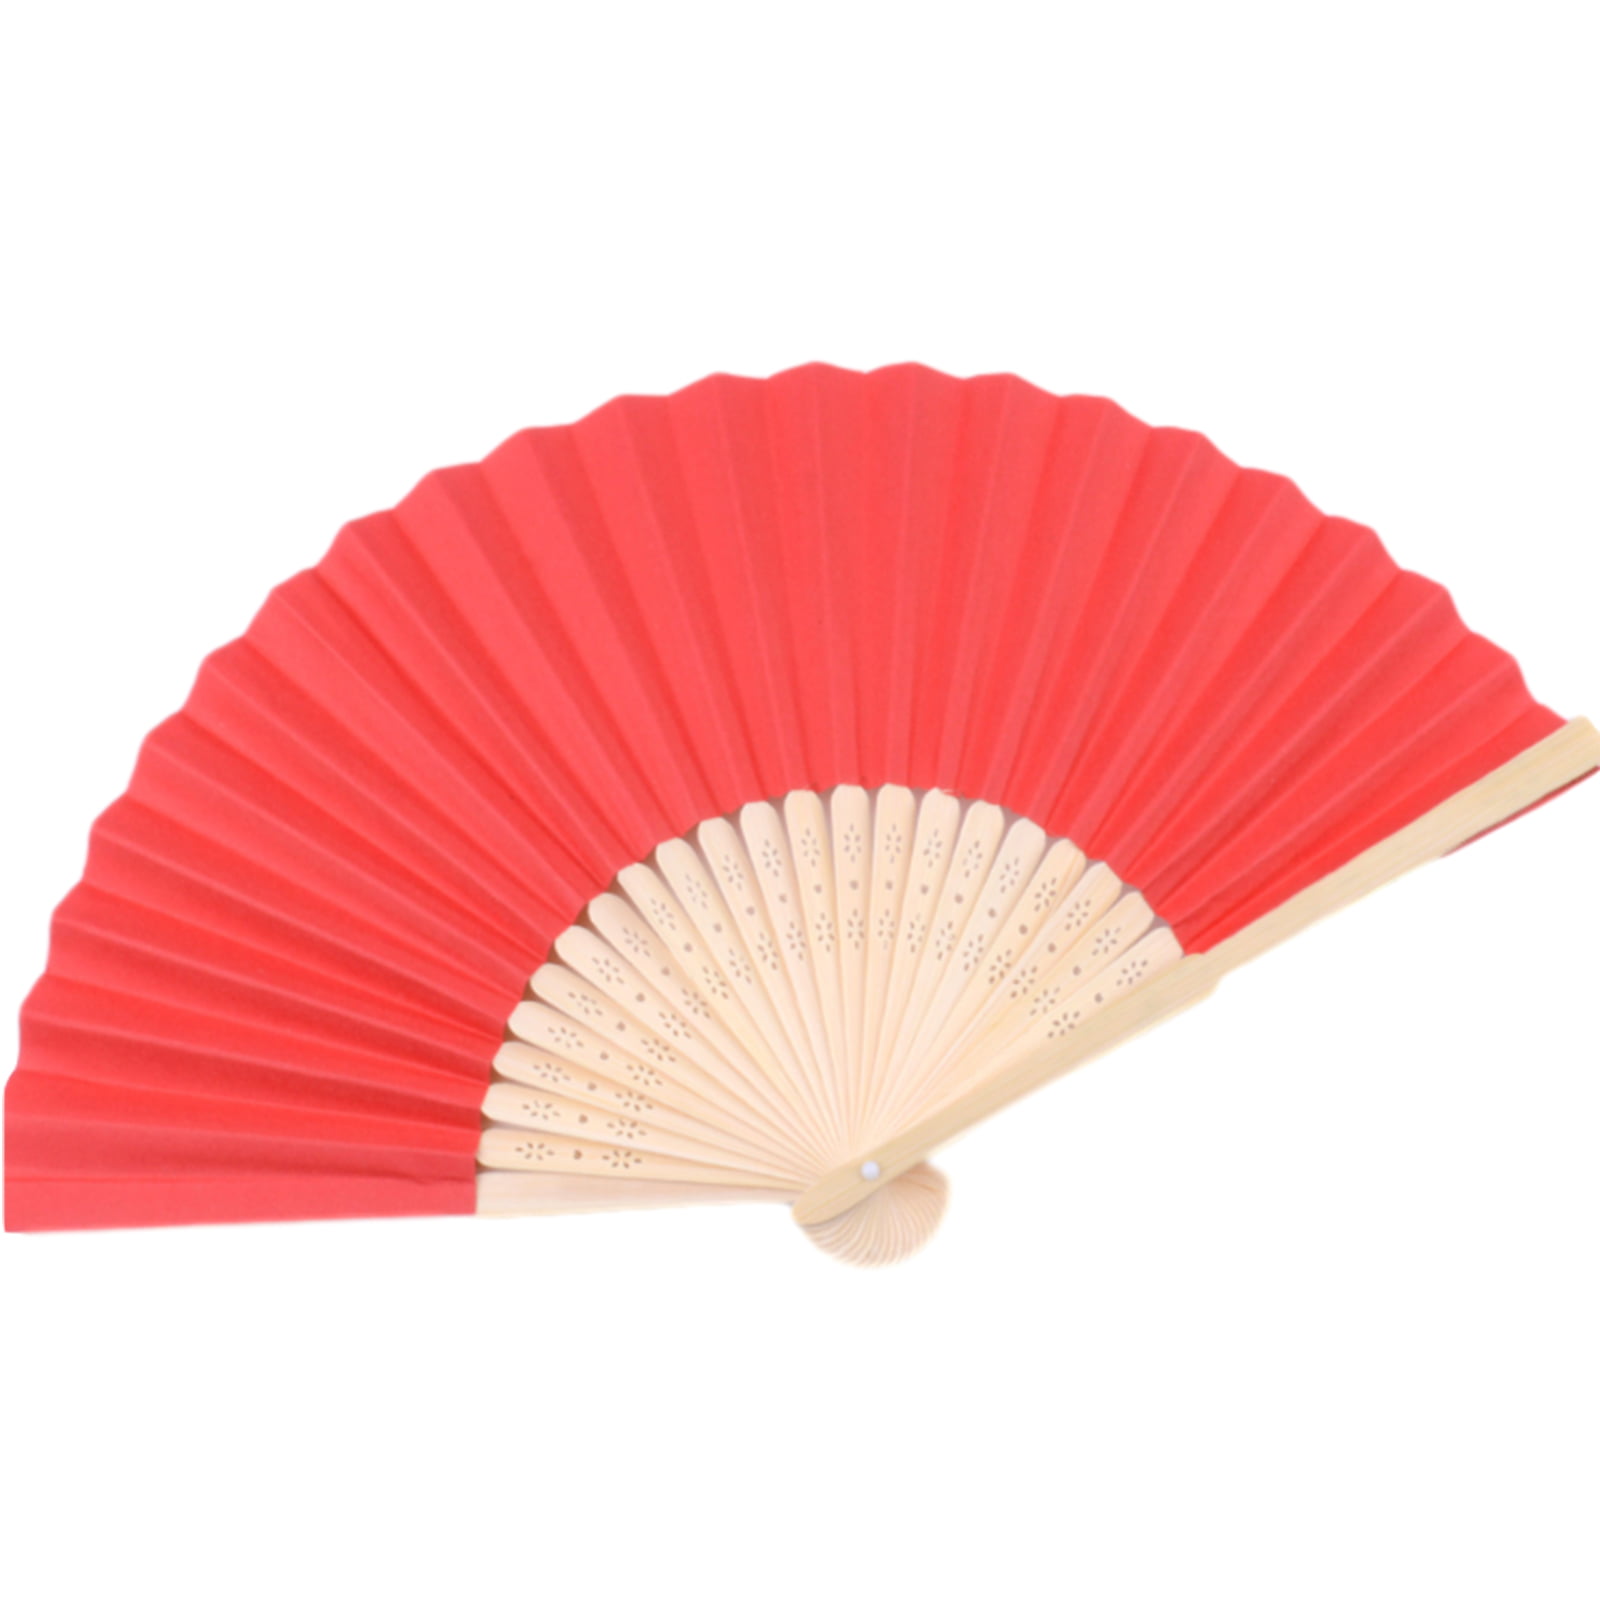 VIOCIWUO 12Pcs Handheld Paper Folding Fan Multicolor Paint Chinese Bamboo  Fan for Children's Drawings, Handicrafts, Party Favors, DIY Decoration